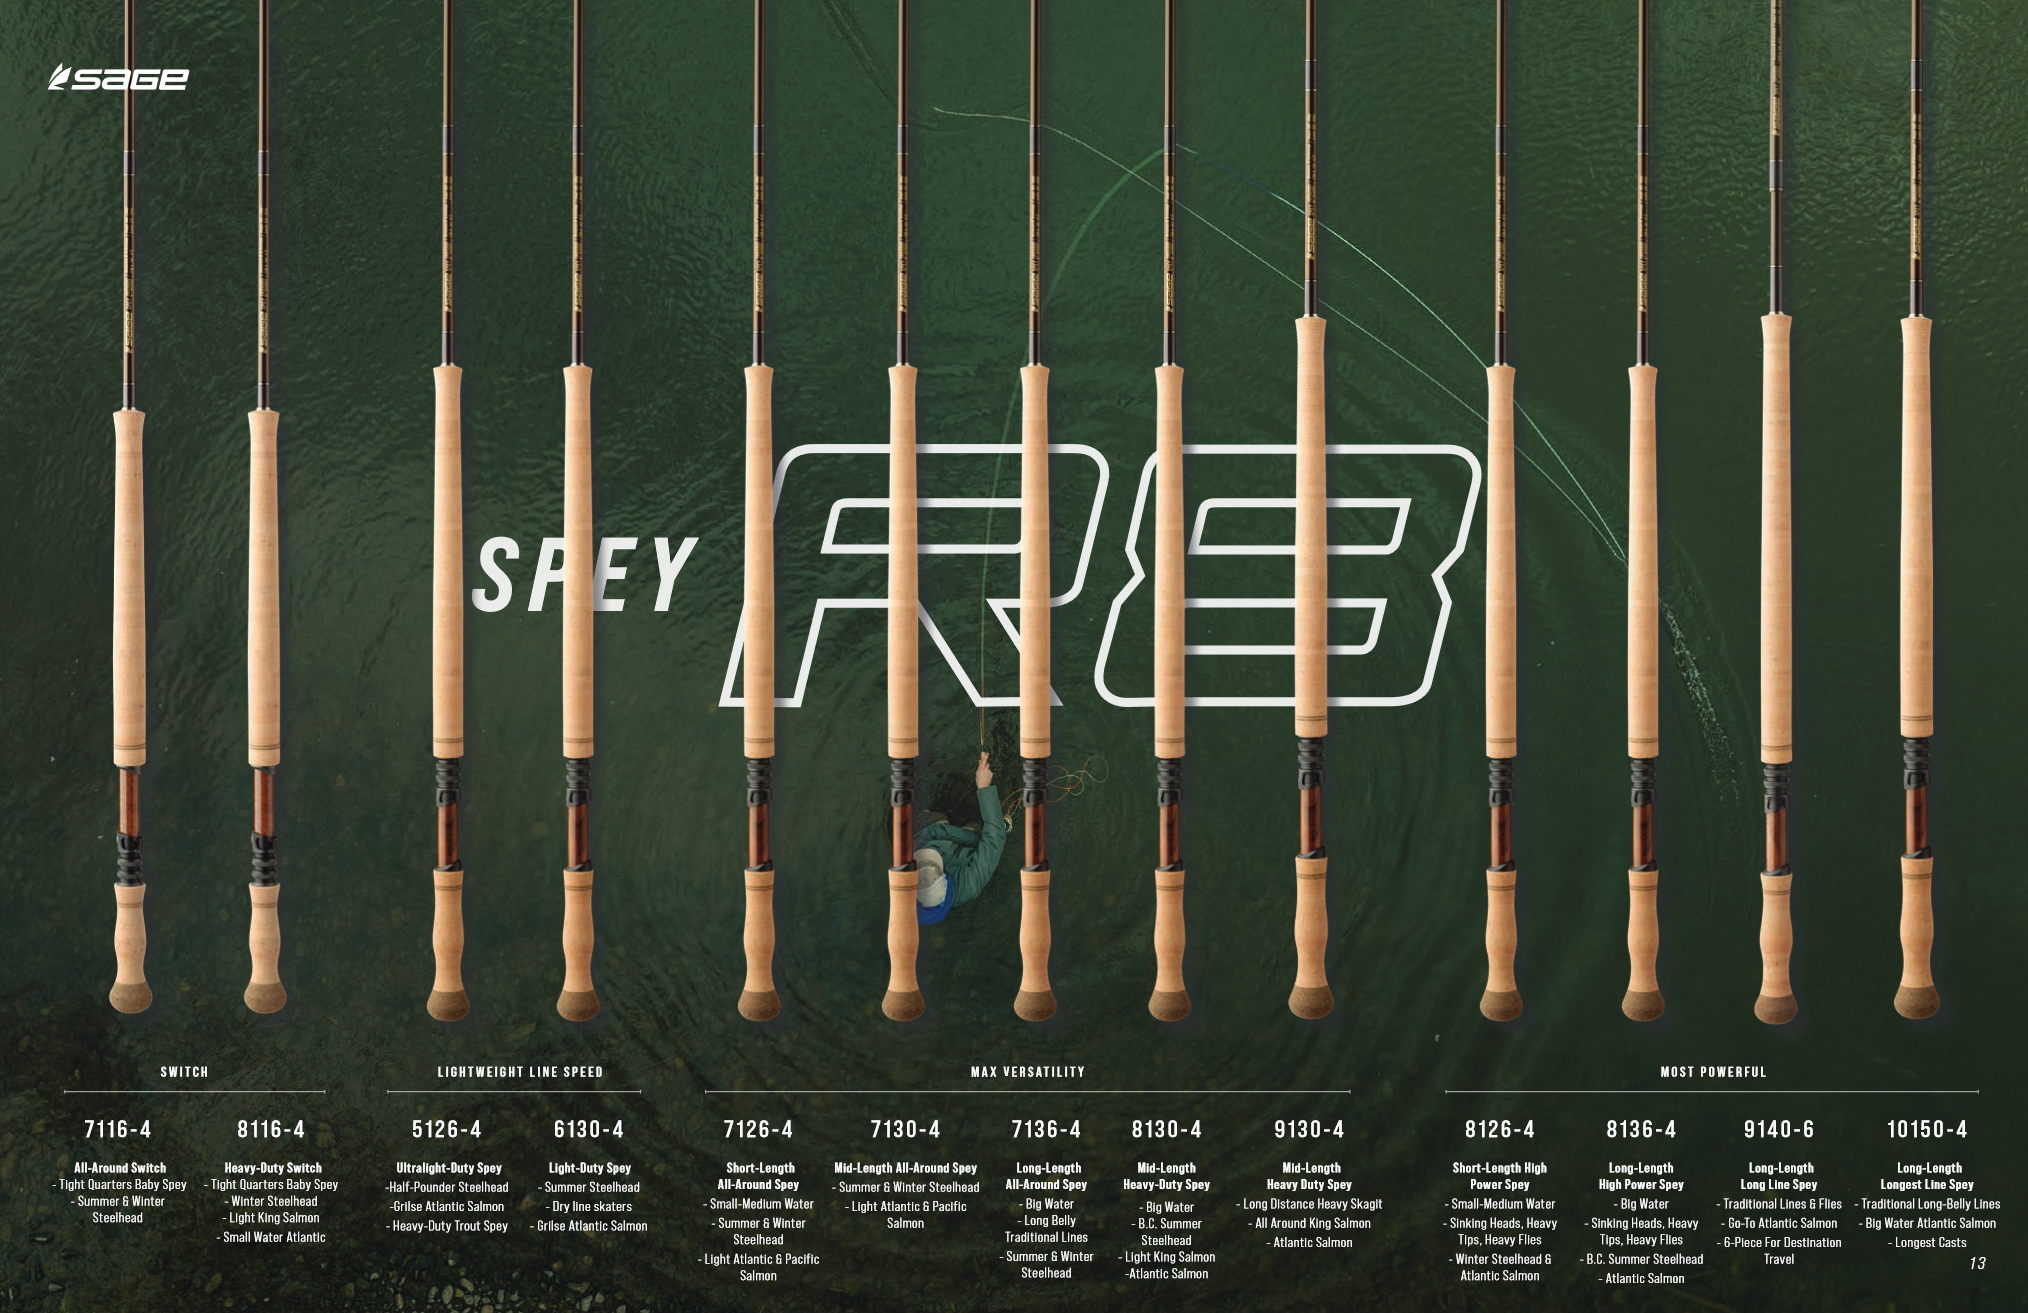 Sage SPEY R8 9140-6 9wt 14'0" The Most Powerful Spey Rods - NEW!